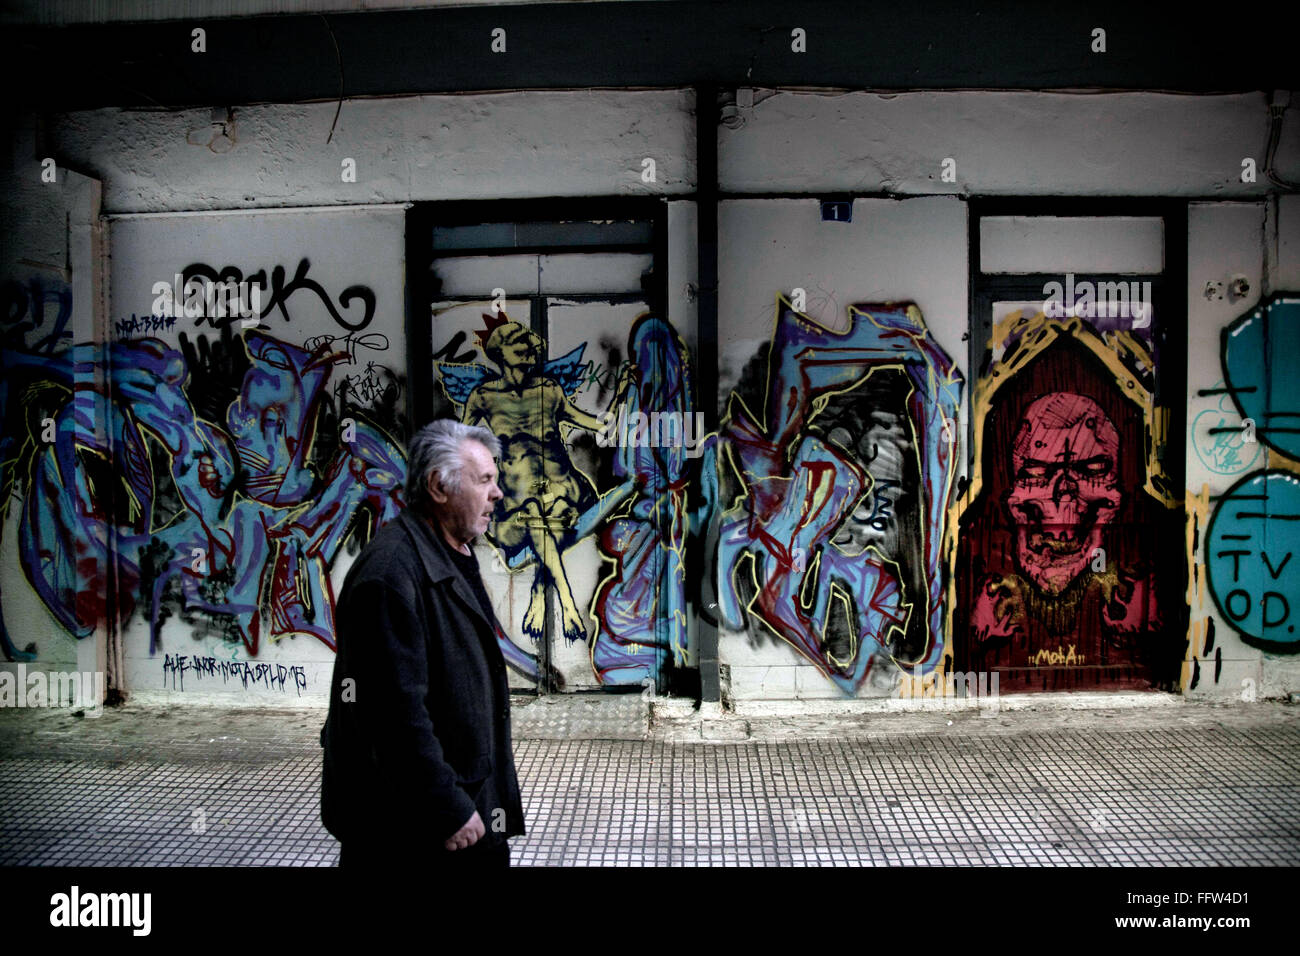 Graffitis in the streets of Athens. -  20/02/2015  -  Greece / Attica / Athens  -  Graffitis in the streets of Athens.   -  Stef Stock Photo